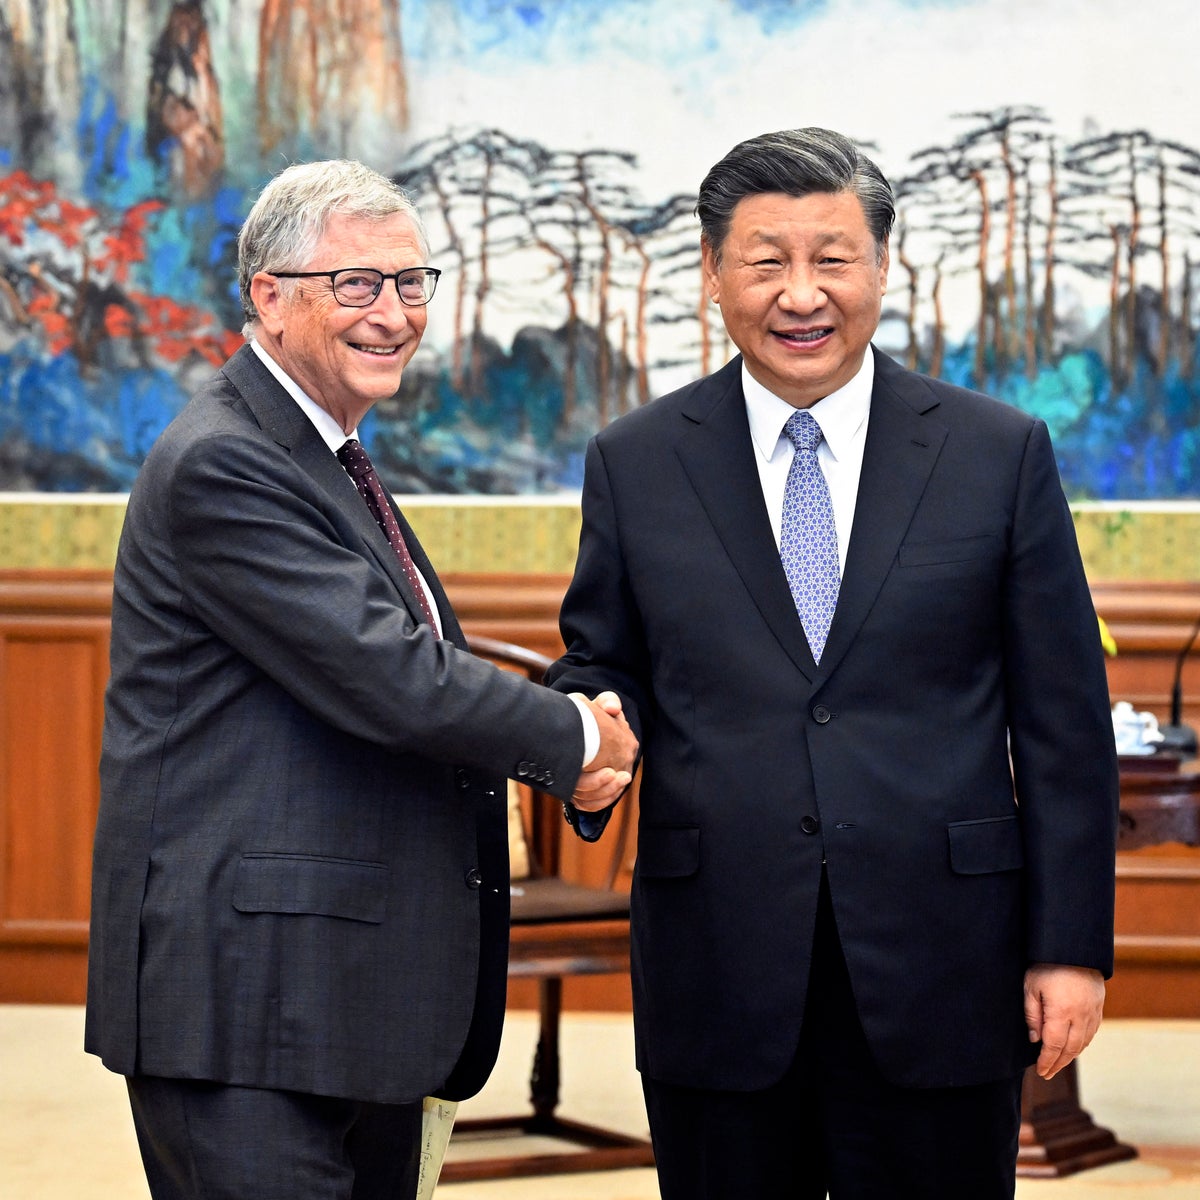 Bill Gates meets Chinese president Xi Jinping on China visit | The  Independent